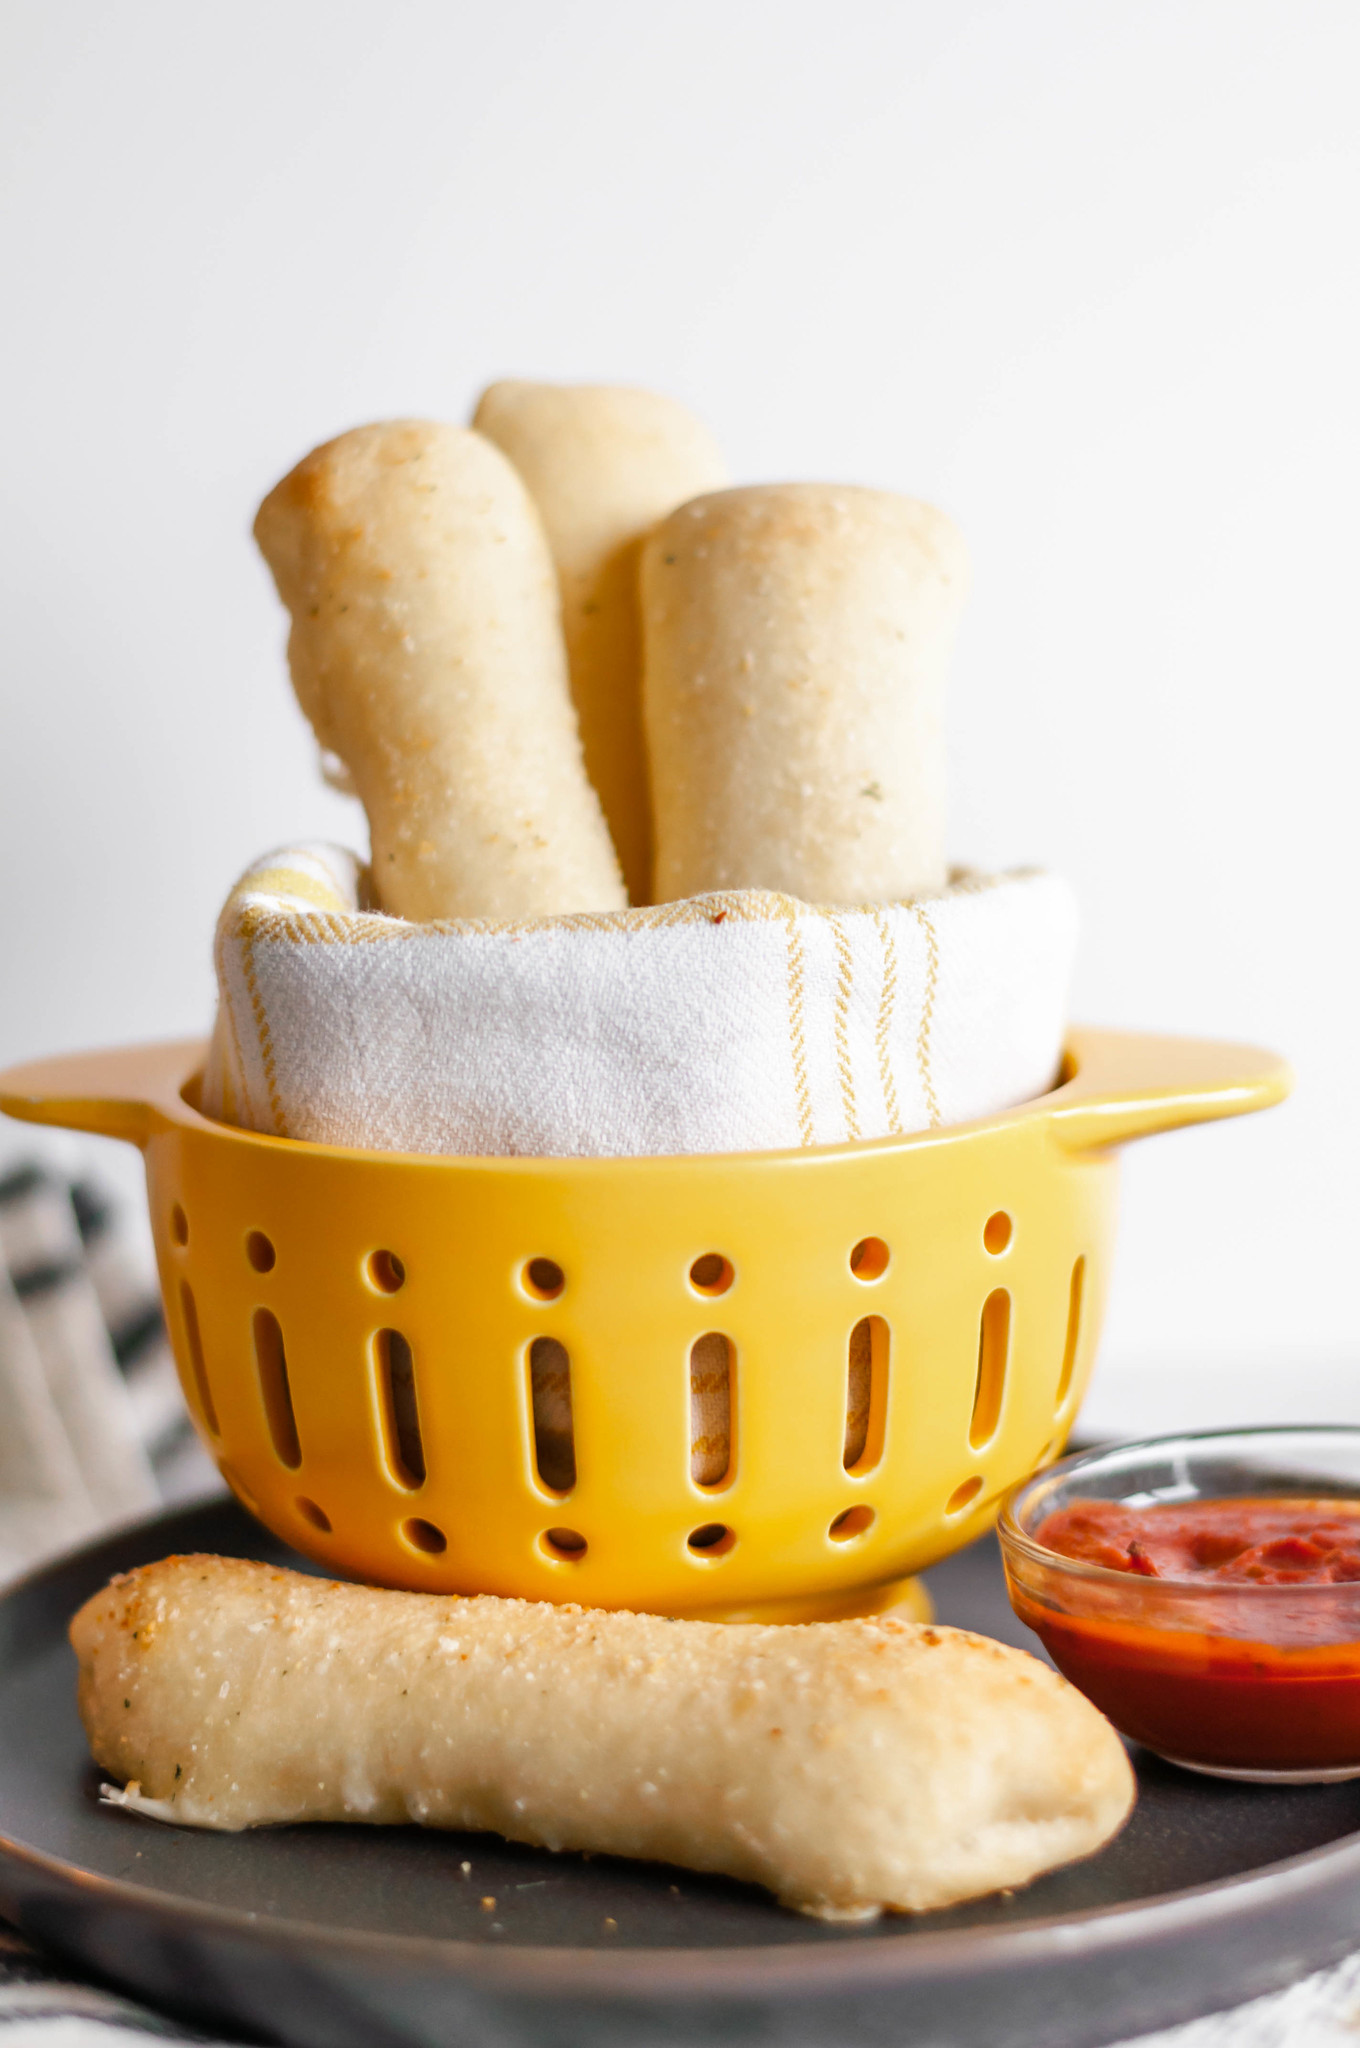 Cheese Stuffed Breadsticks are super simple, 4 ingredient perfection. Pizza dough, string cheese, butter and garlic salt are all you need for this cheesy, carb deliciousness.